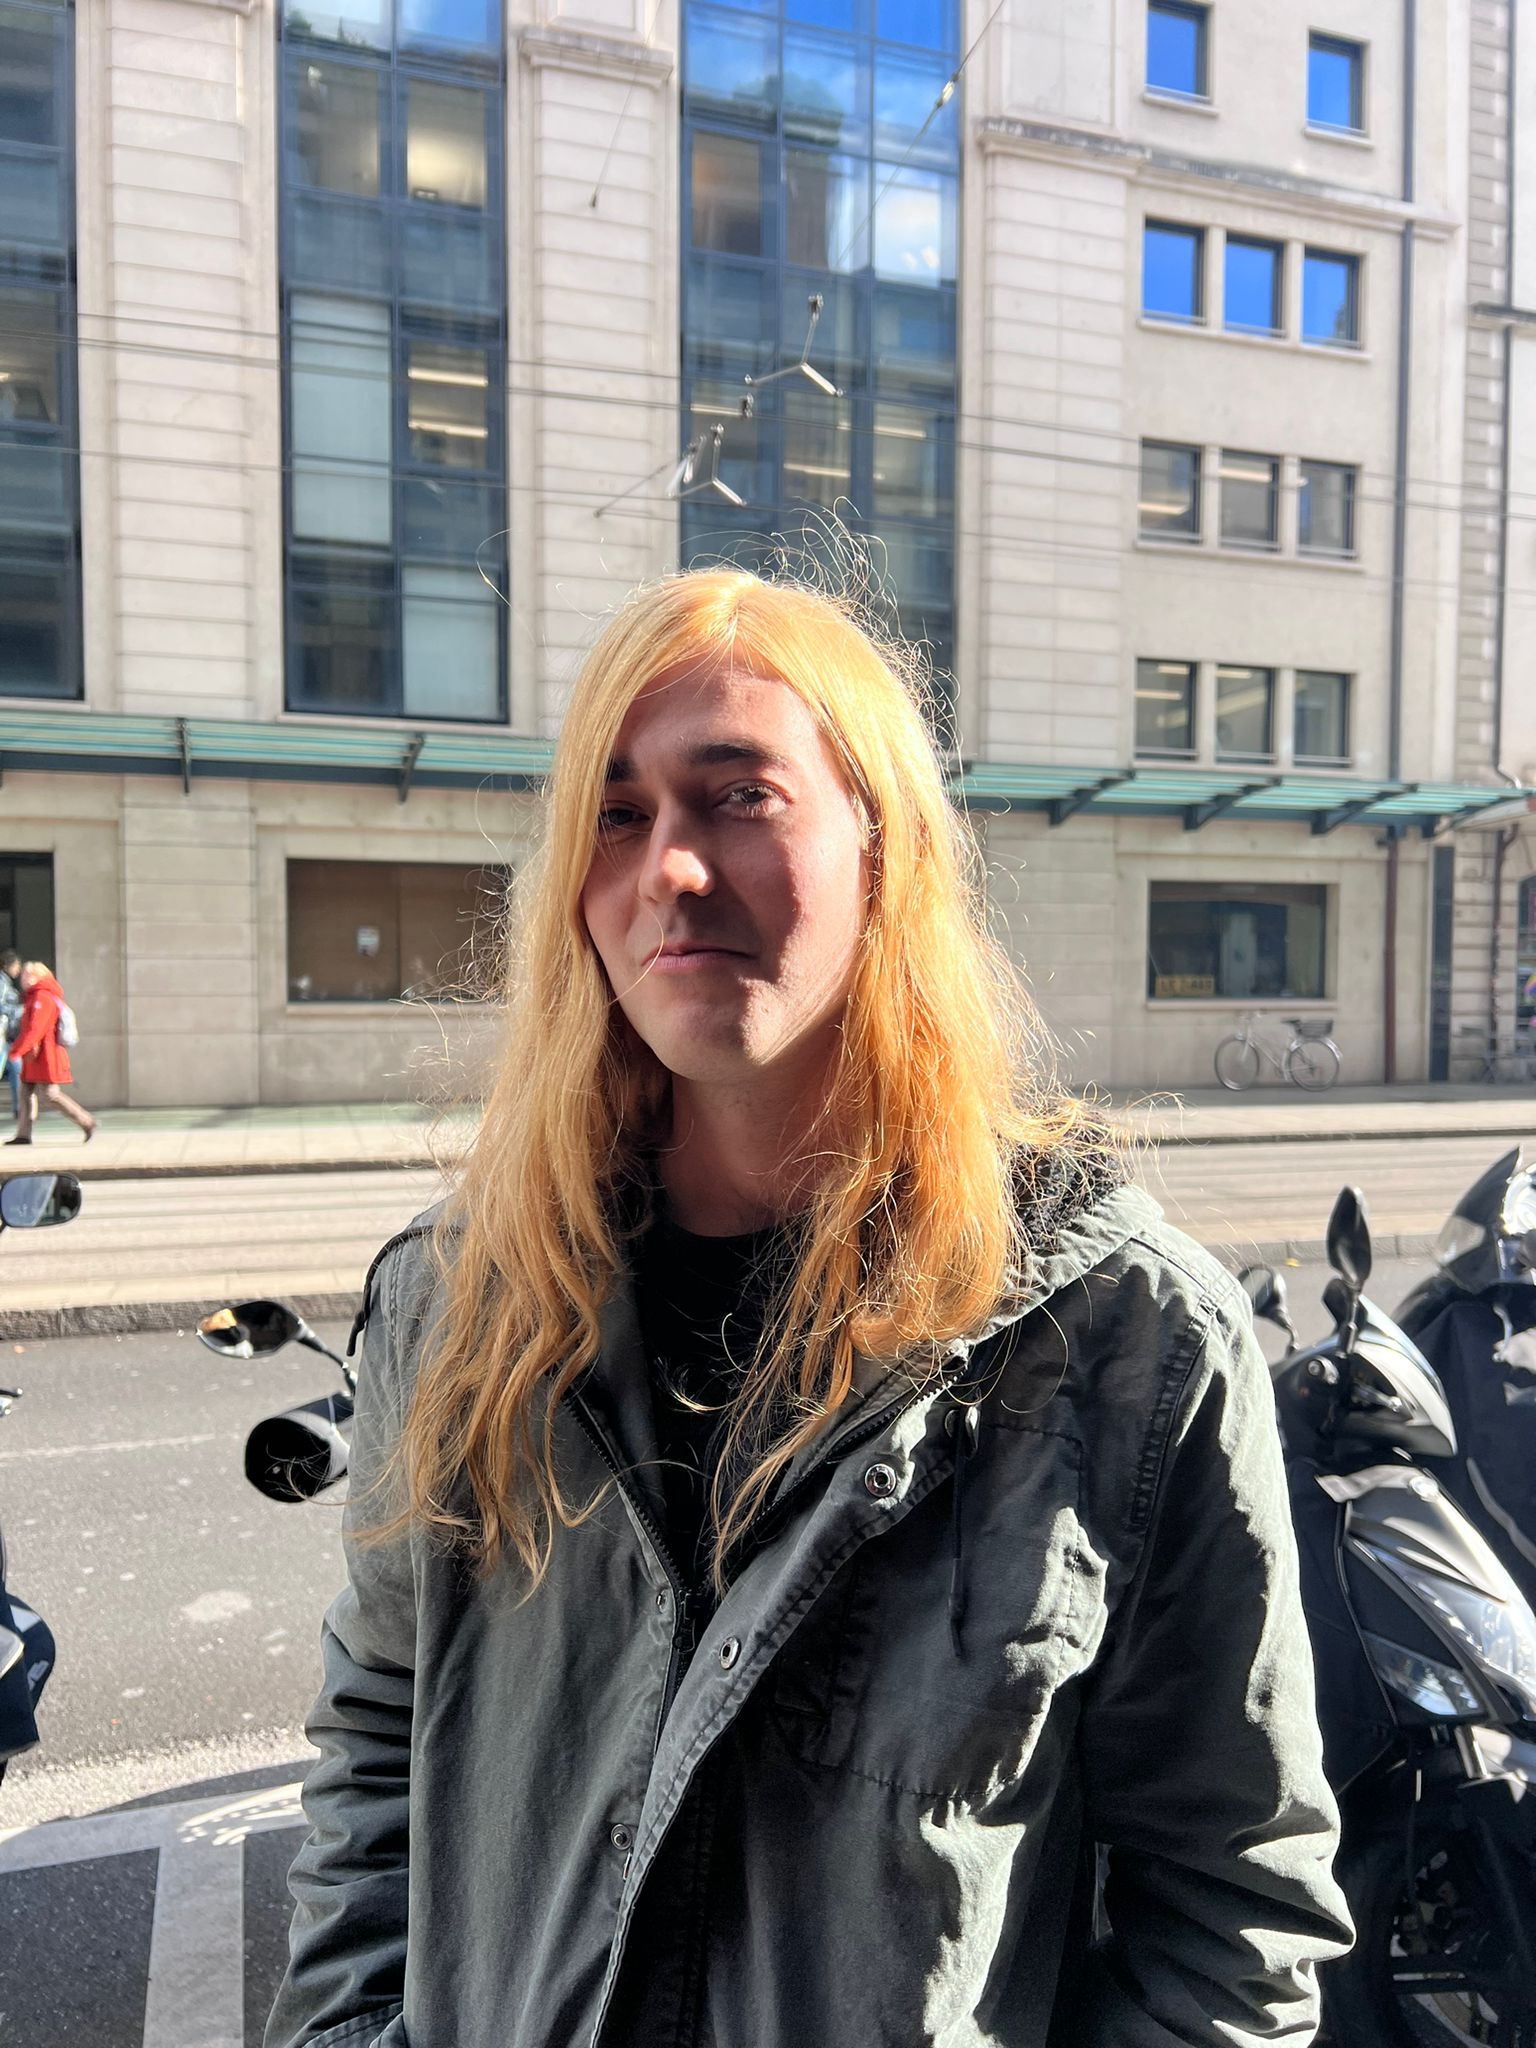 Image of Alex Bishop with gold hair